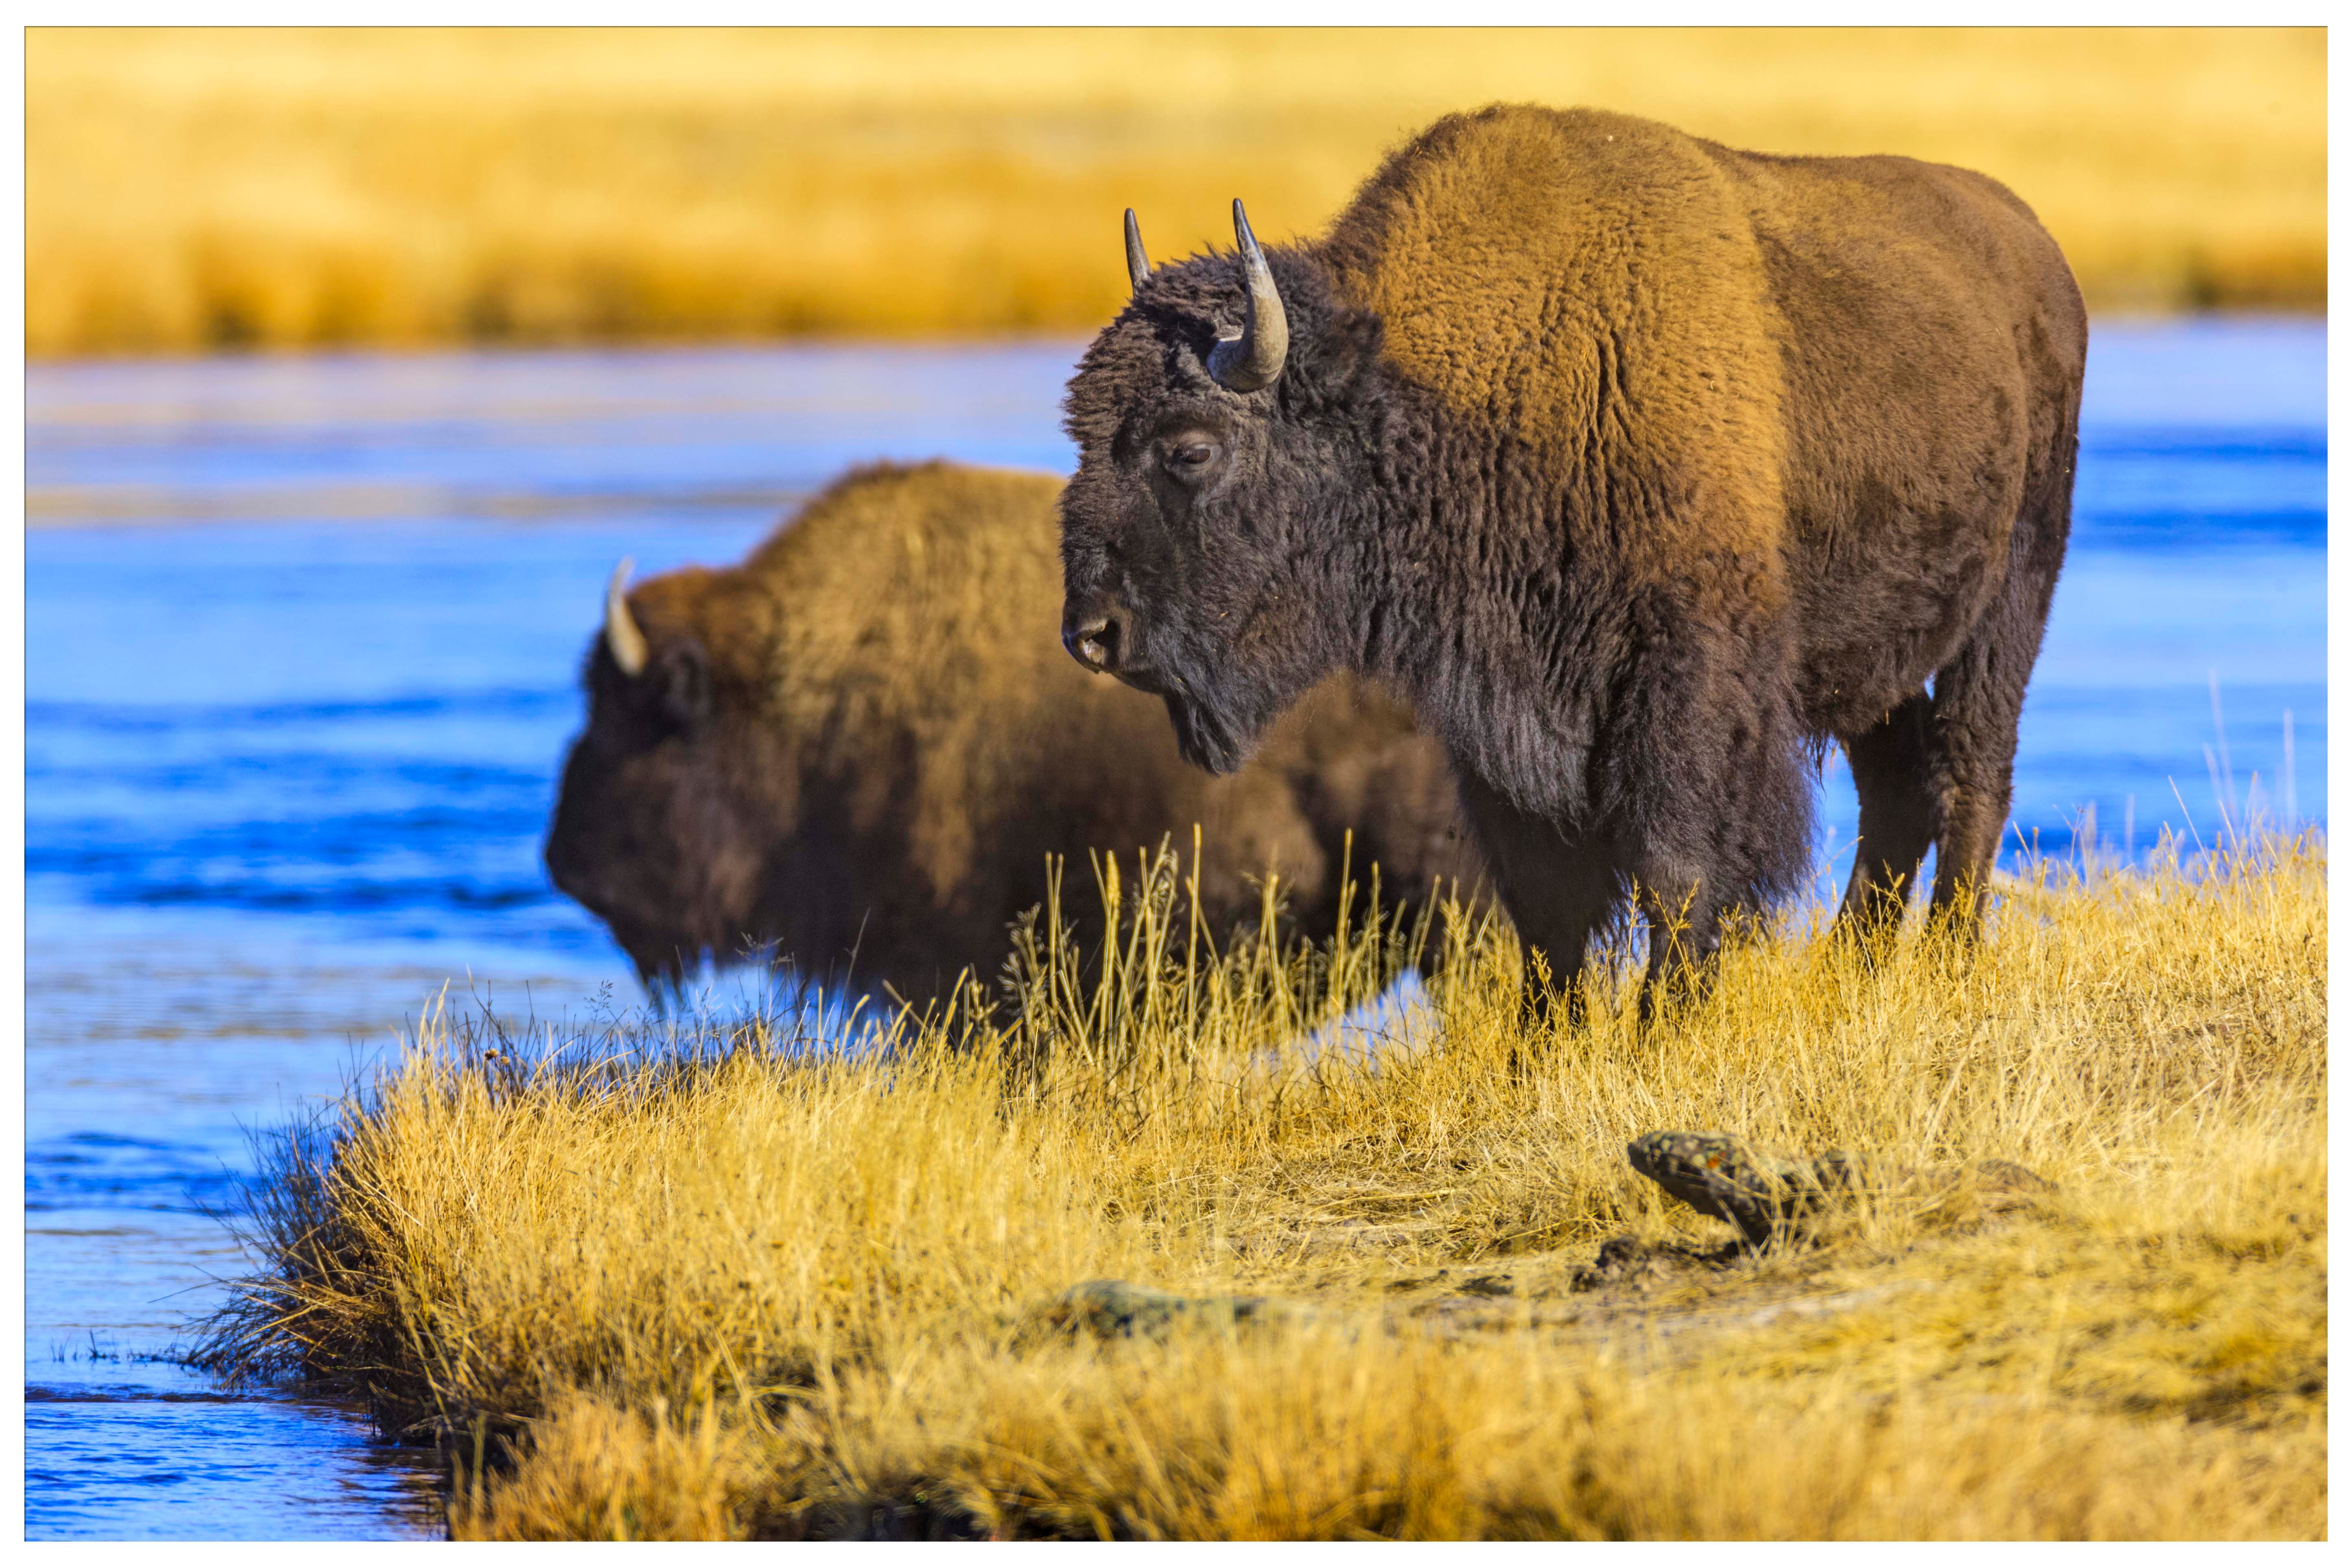 15 Interesting Yellowstone National Park Facts You Didn't Know